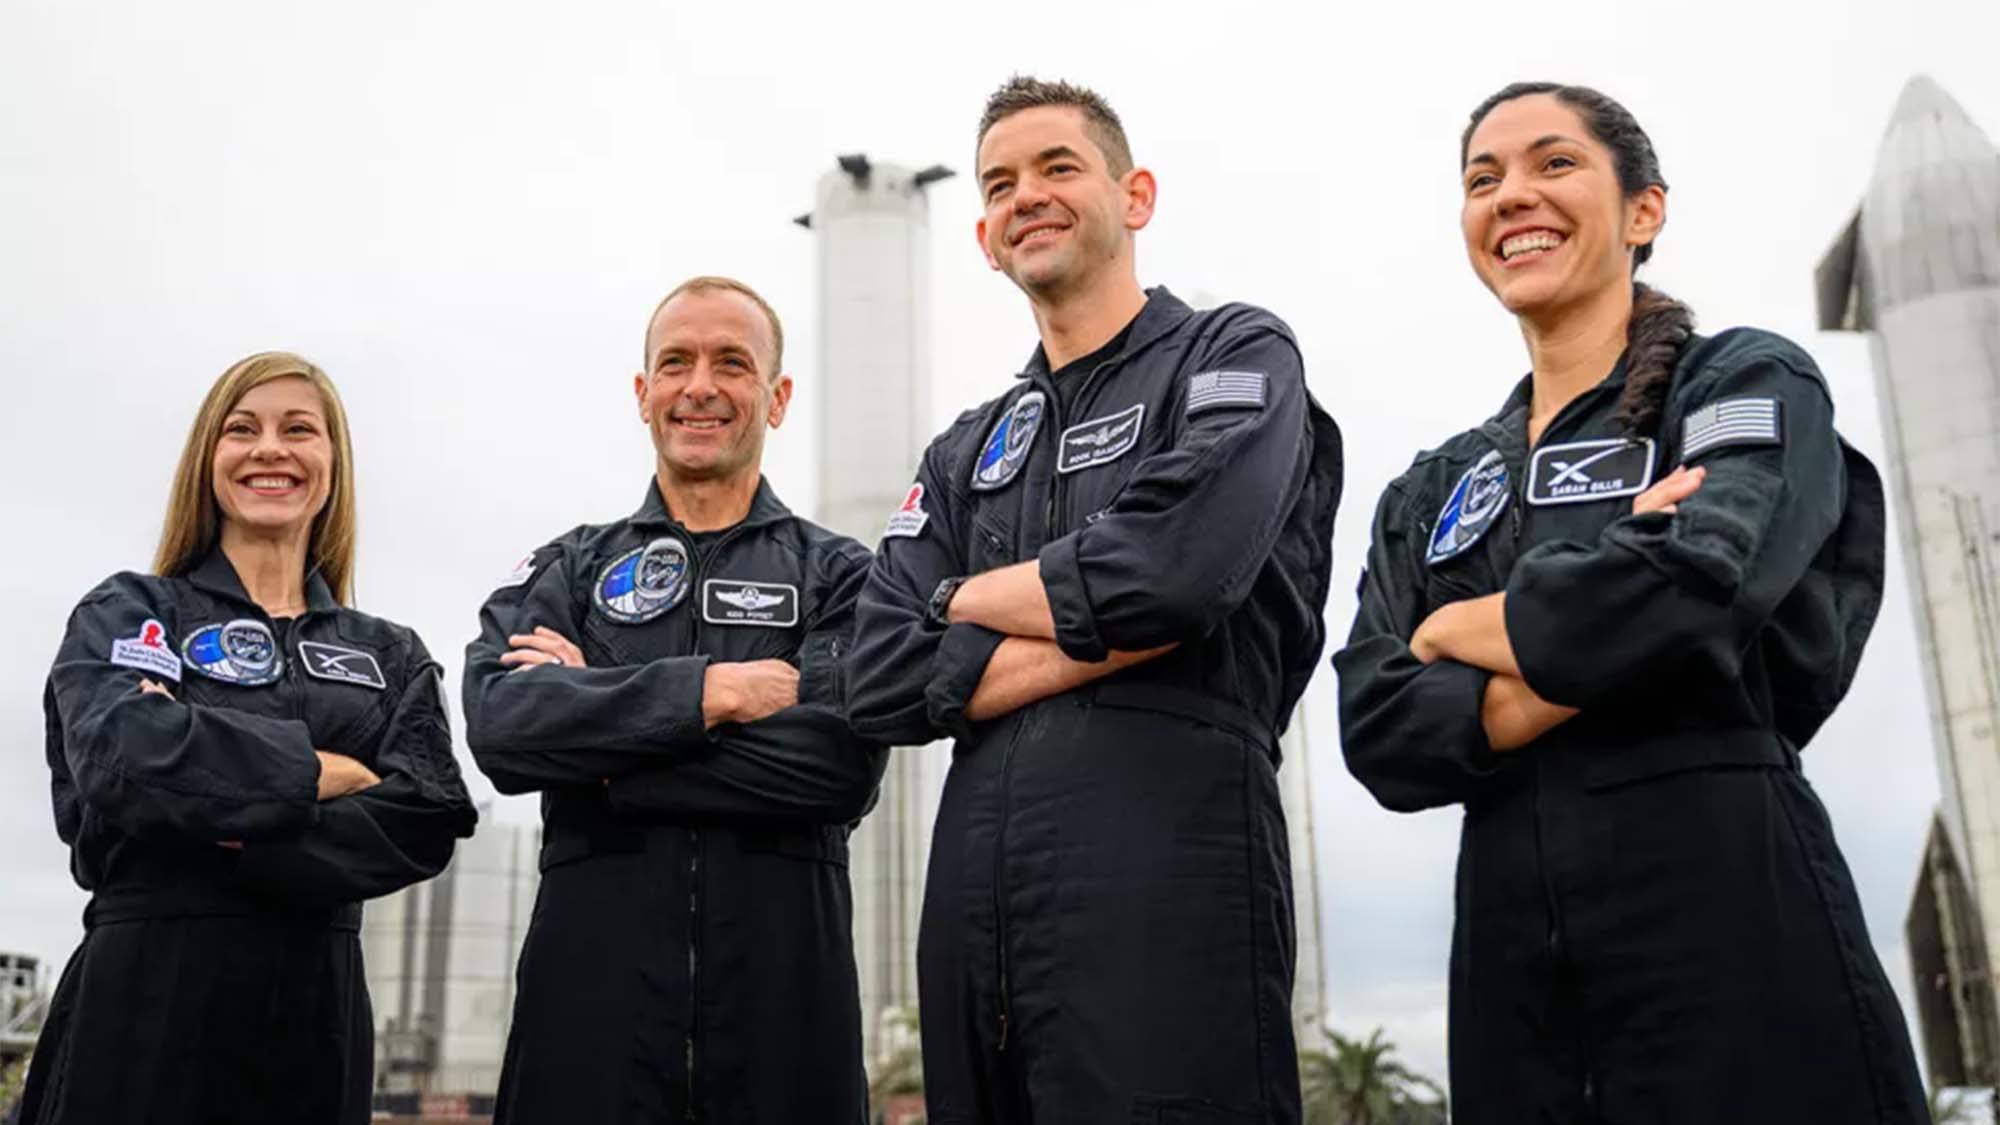 The crew of the Polaris Dawn mission standing in front of SpaceX Dragon rockets